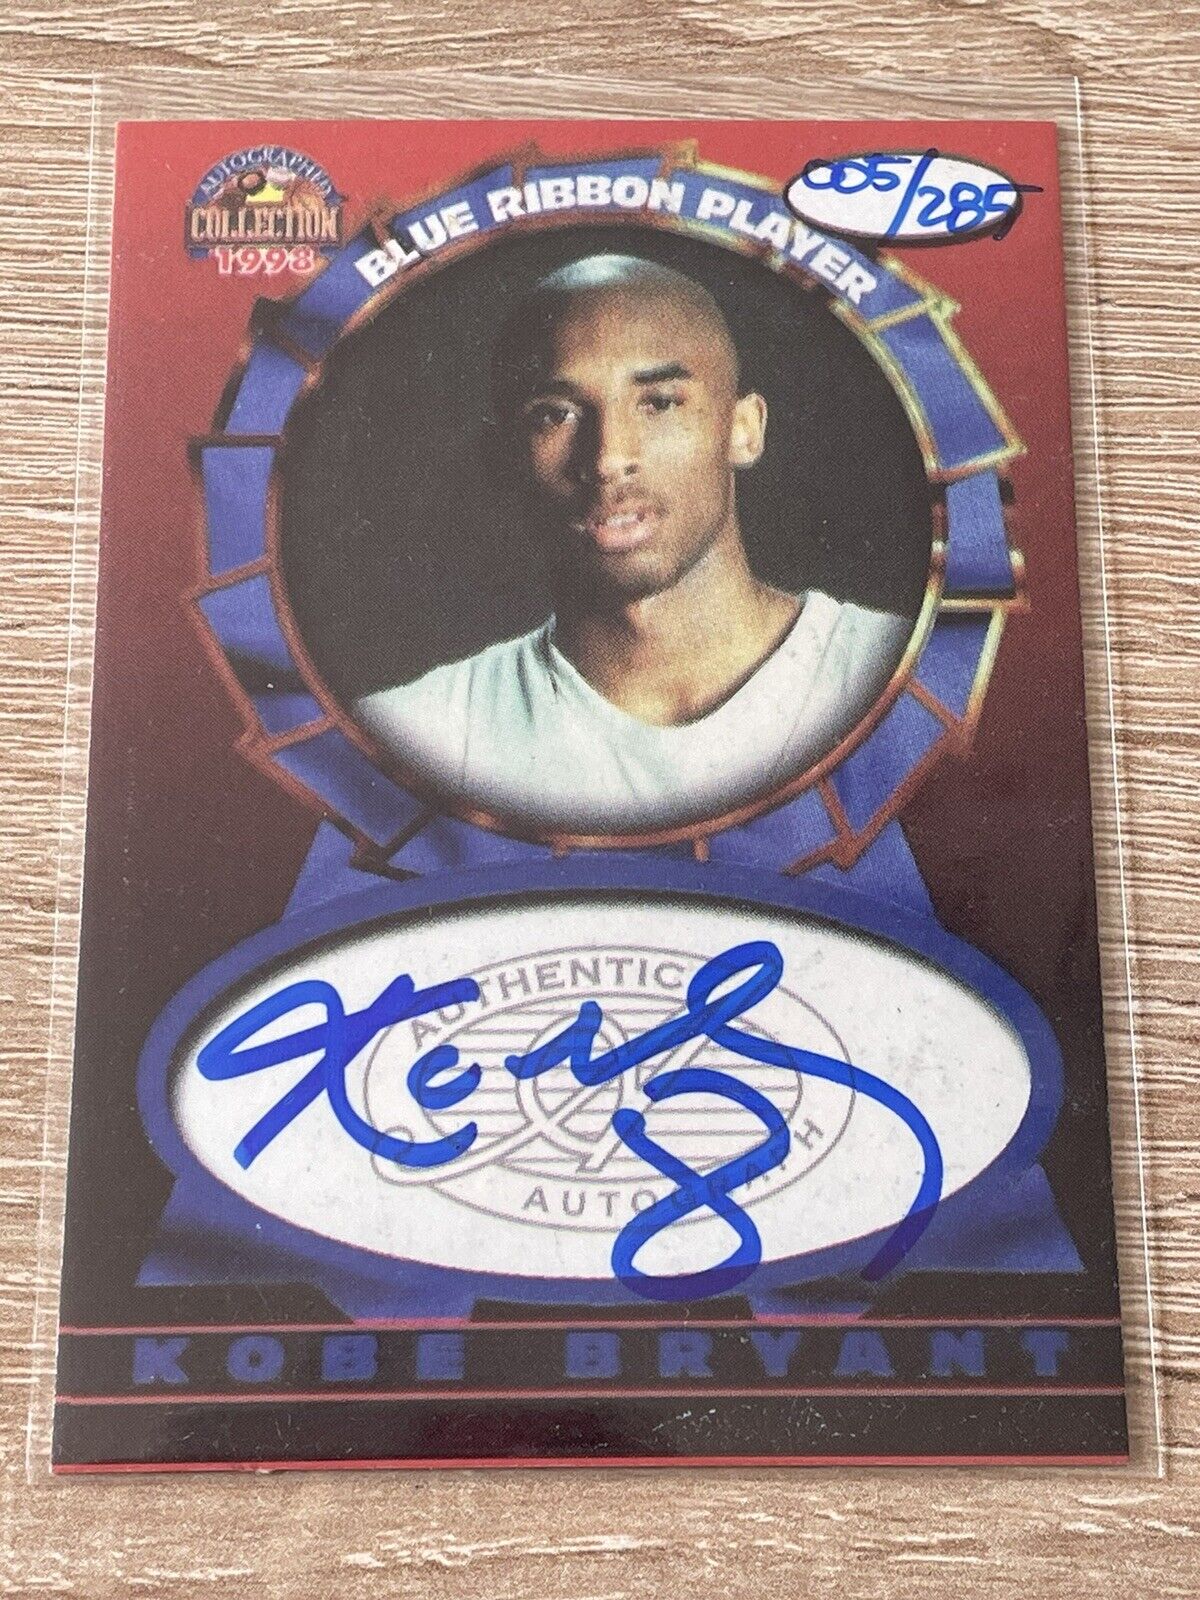 1997-98 Score Board Autographed Collection Blue Ribbon Player /285 Auto